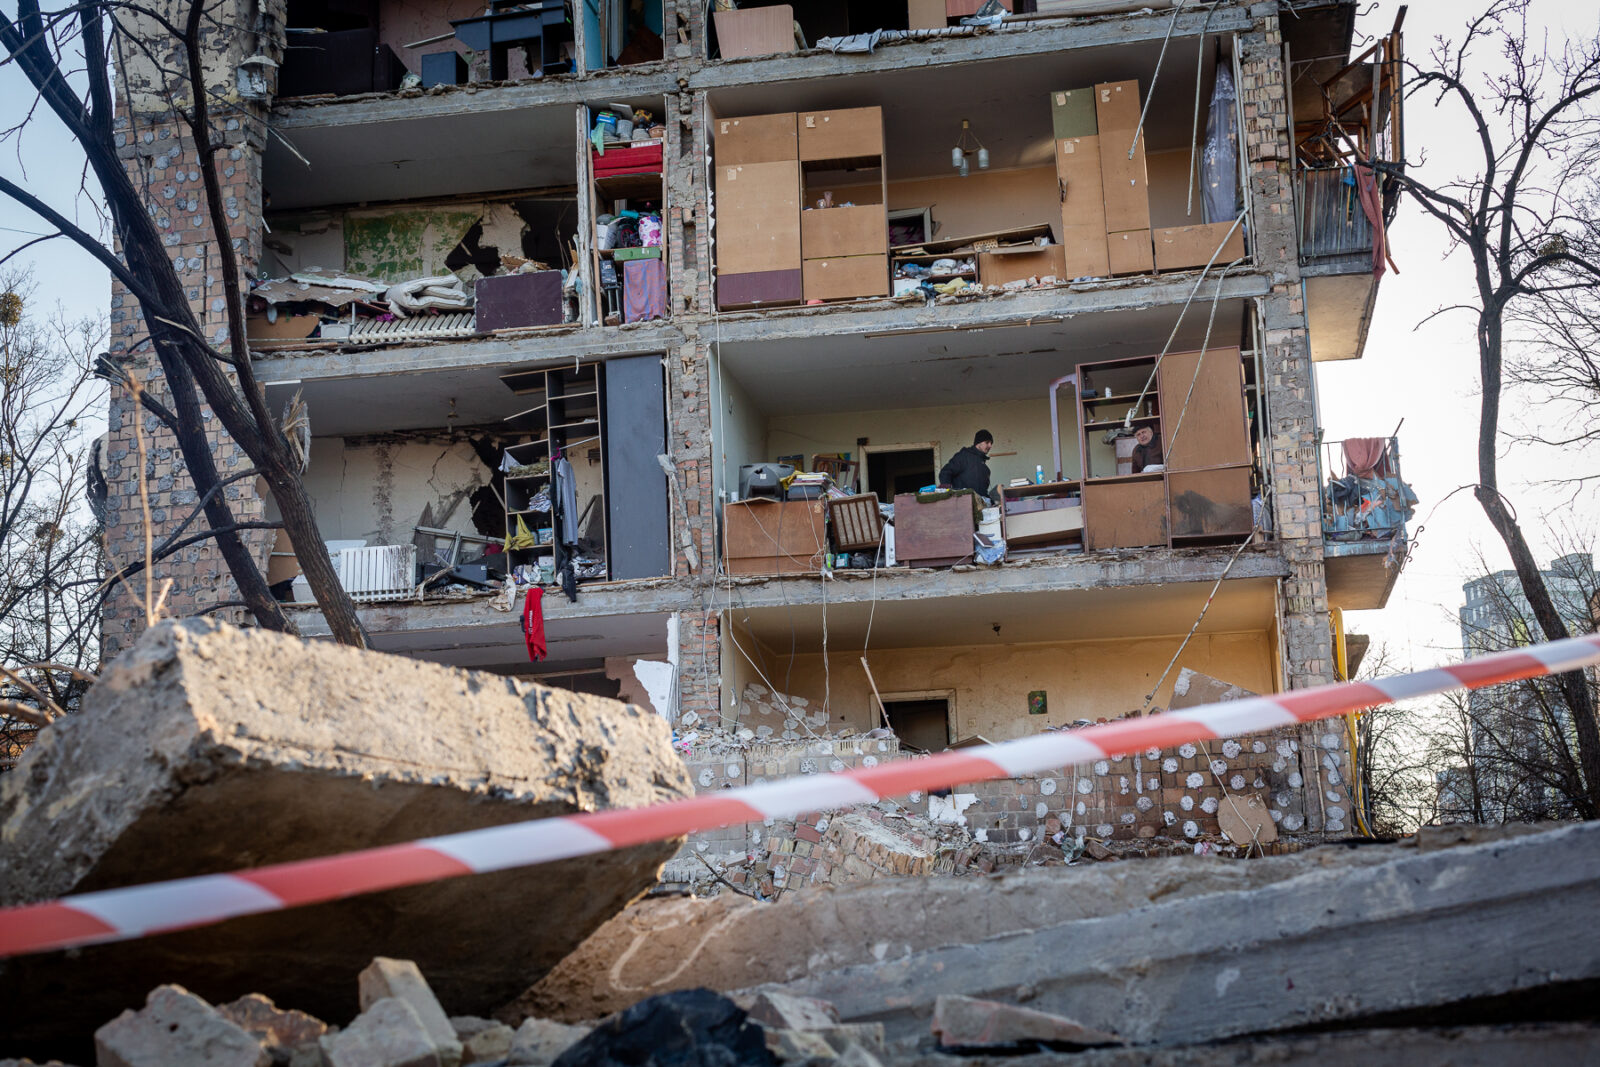 March 19: A Russian rocket attack destroyed apartments in the Vitryani Hory neighborhood of Kyiv, killing one man and injuring five, including children. Volunteers and residents work to clean up the aftermath.